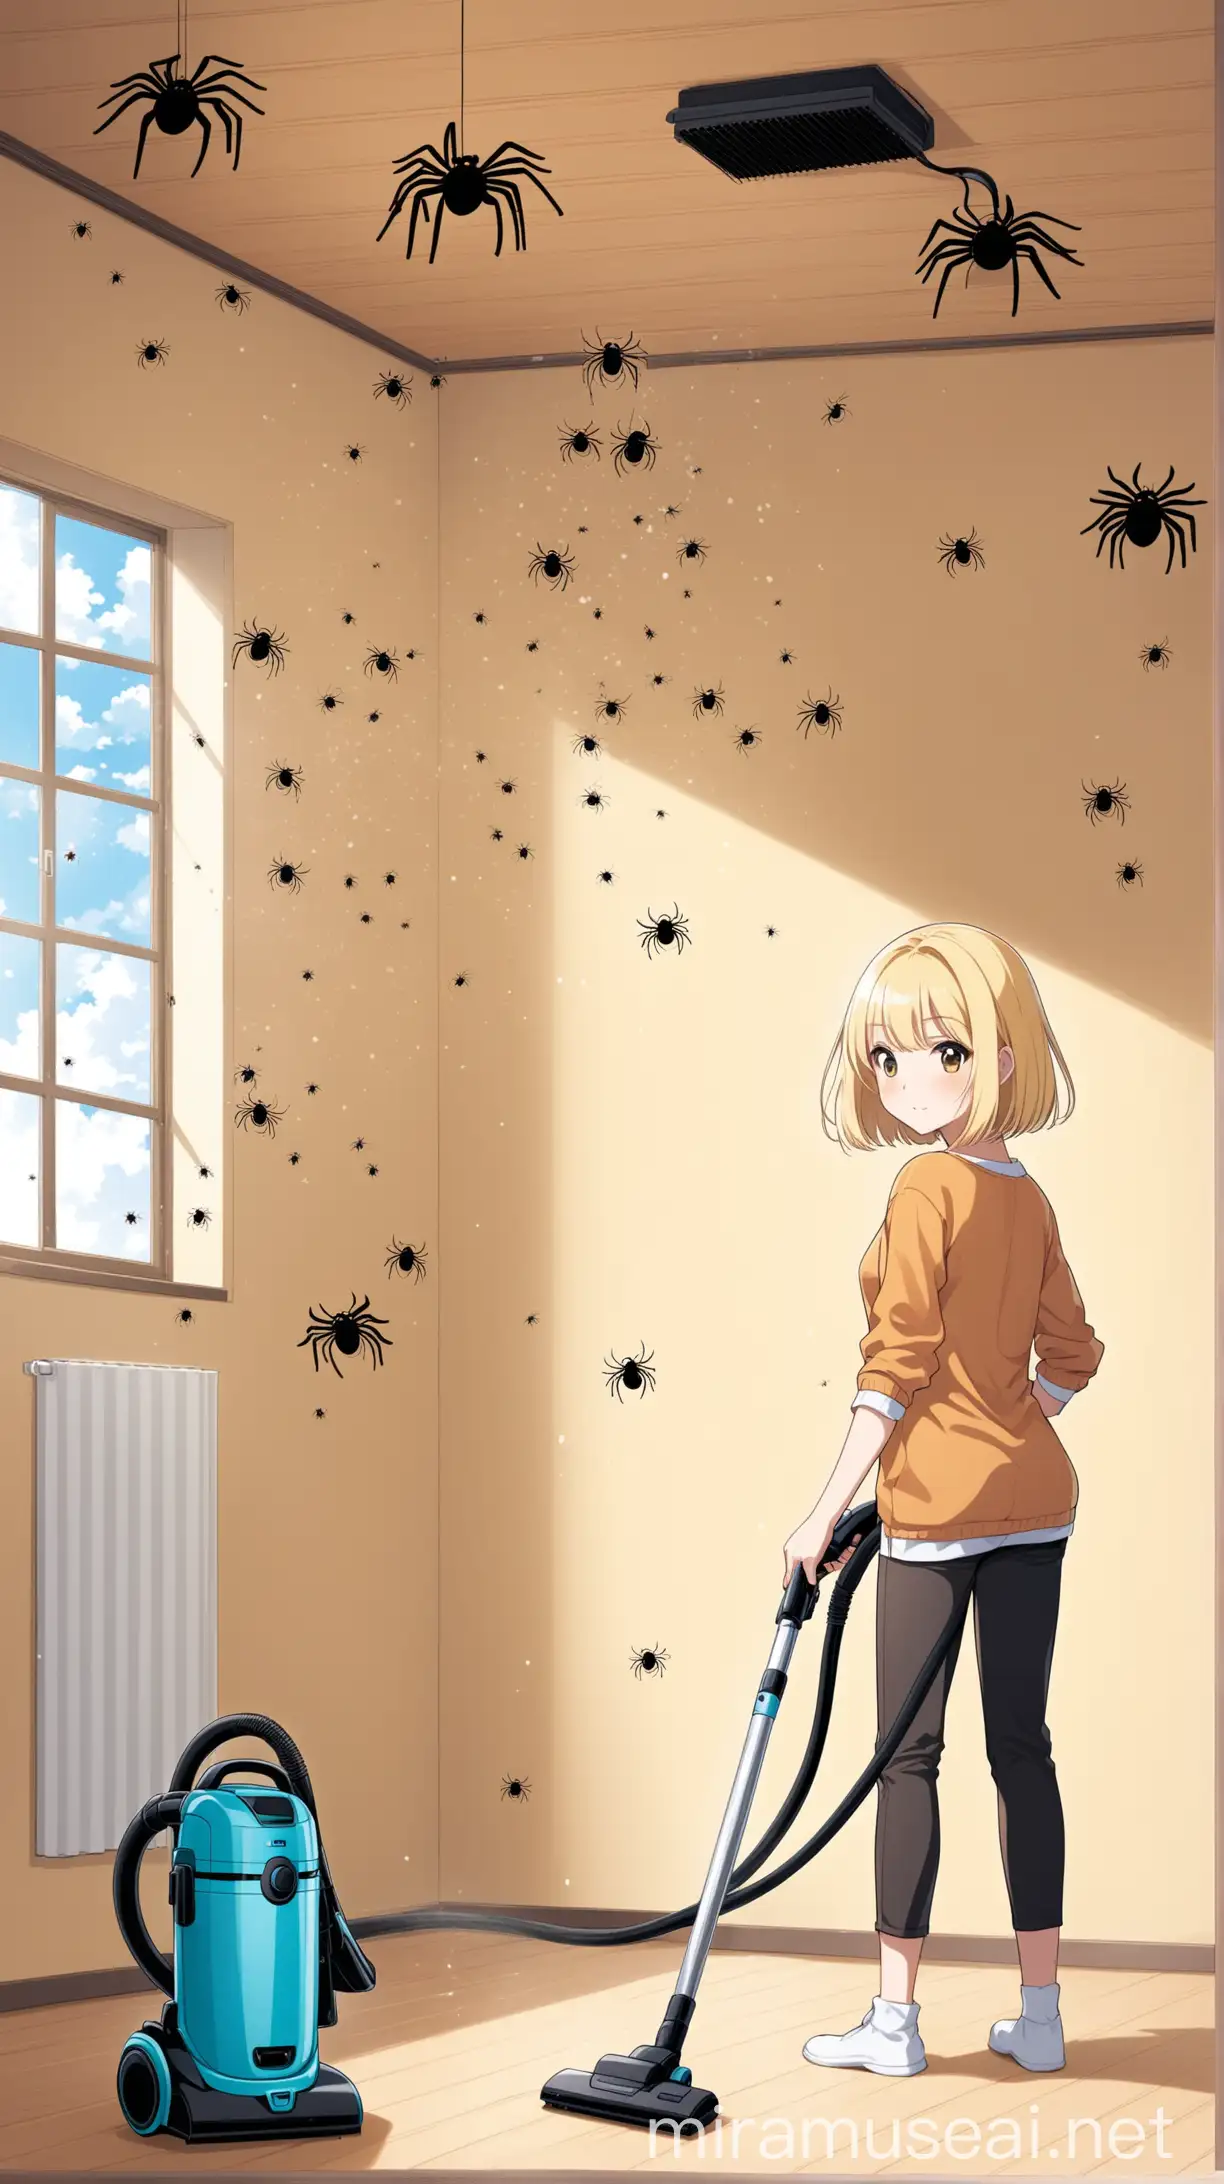 Blond Girl with Bob Haircut Cleaning Apartment from Spiders with Handheld Vacuum Cleaner